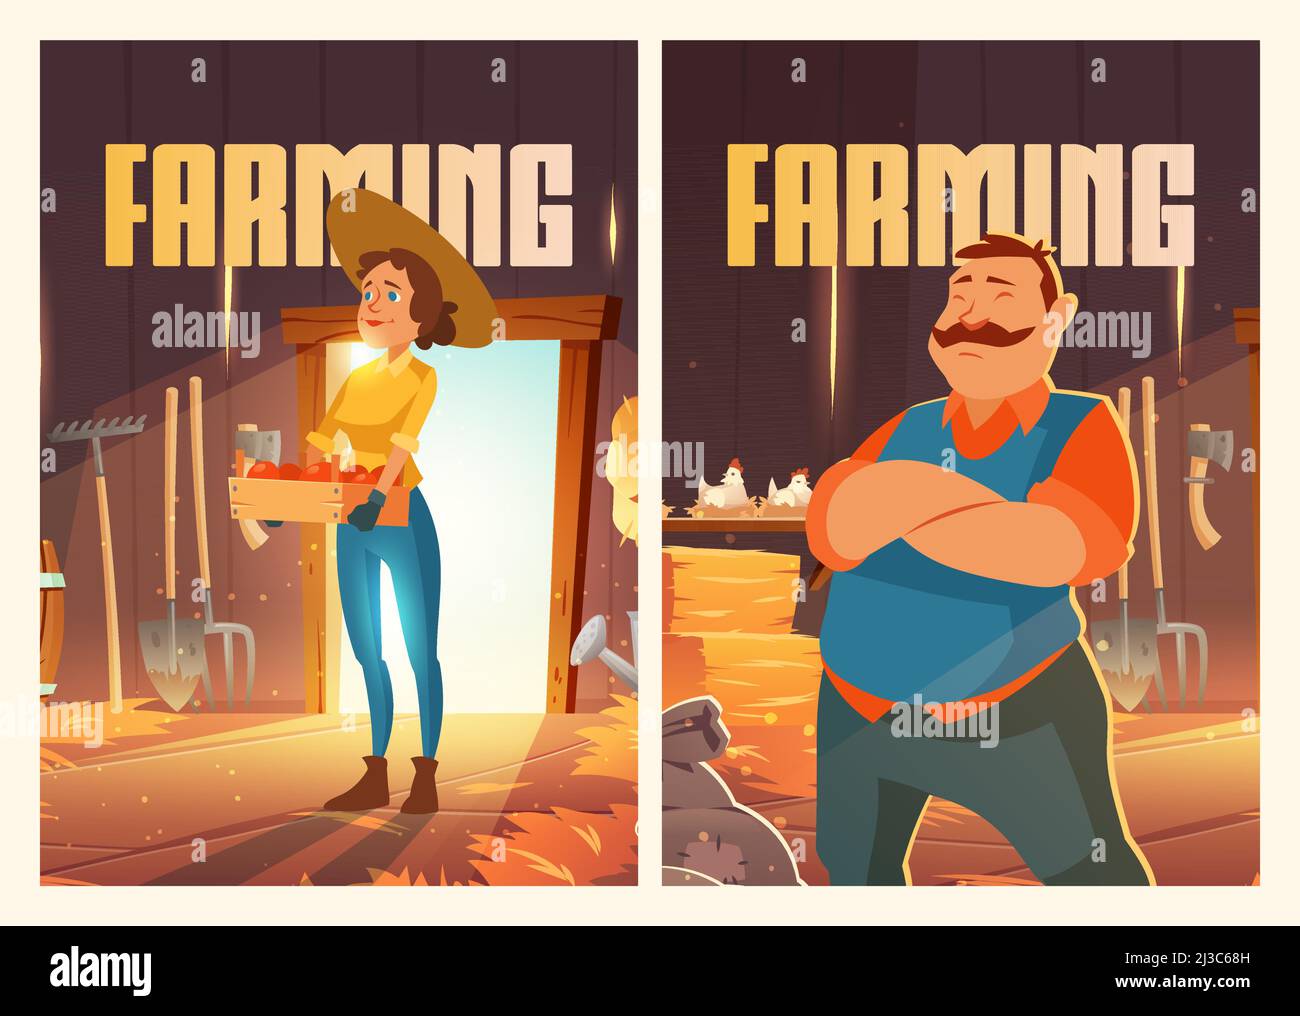 Farming posters with man and woman in barn with chickens, straw and garden tools. Vector flyers with cartoon illustration of farmers in countryside wo Stock Vector